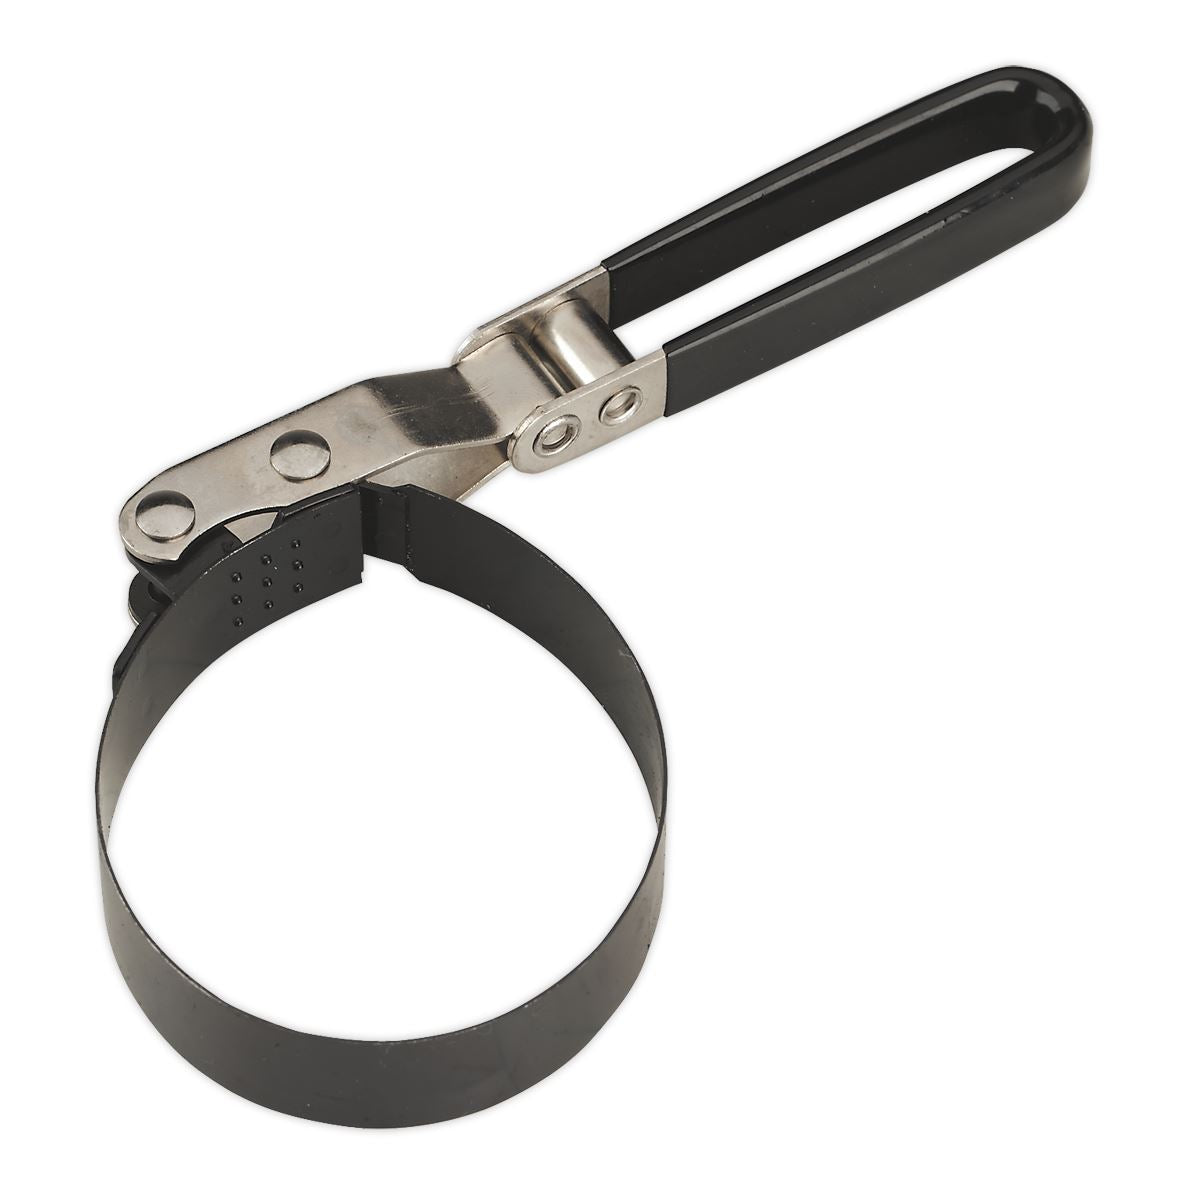 Sealey Oil Filter Band Wrench 89-98mm Capacity